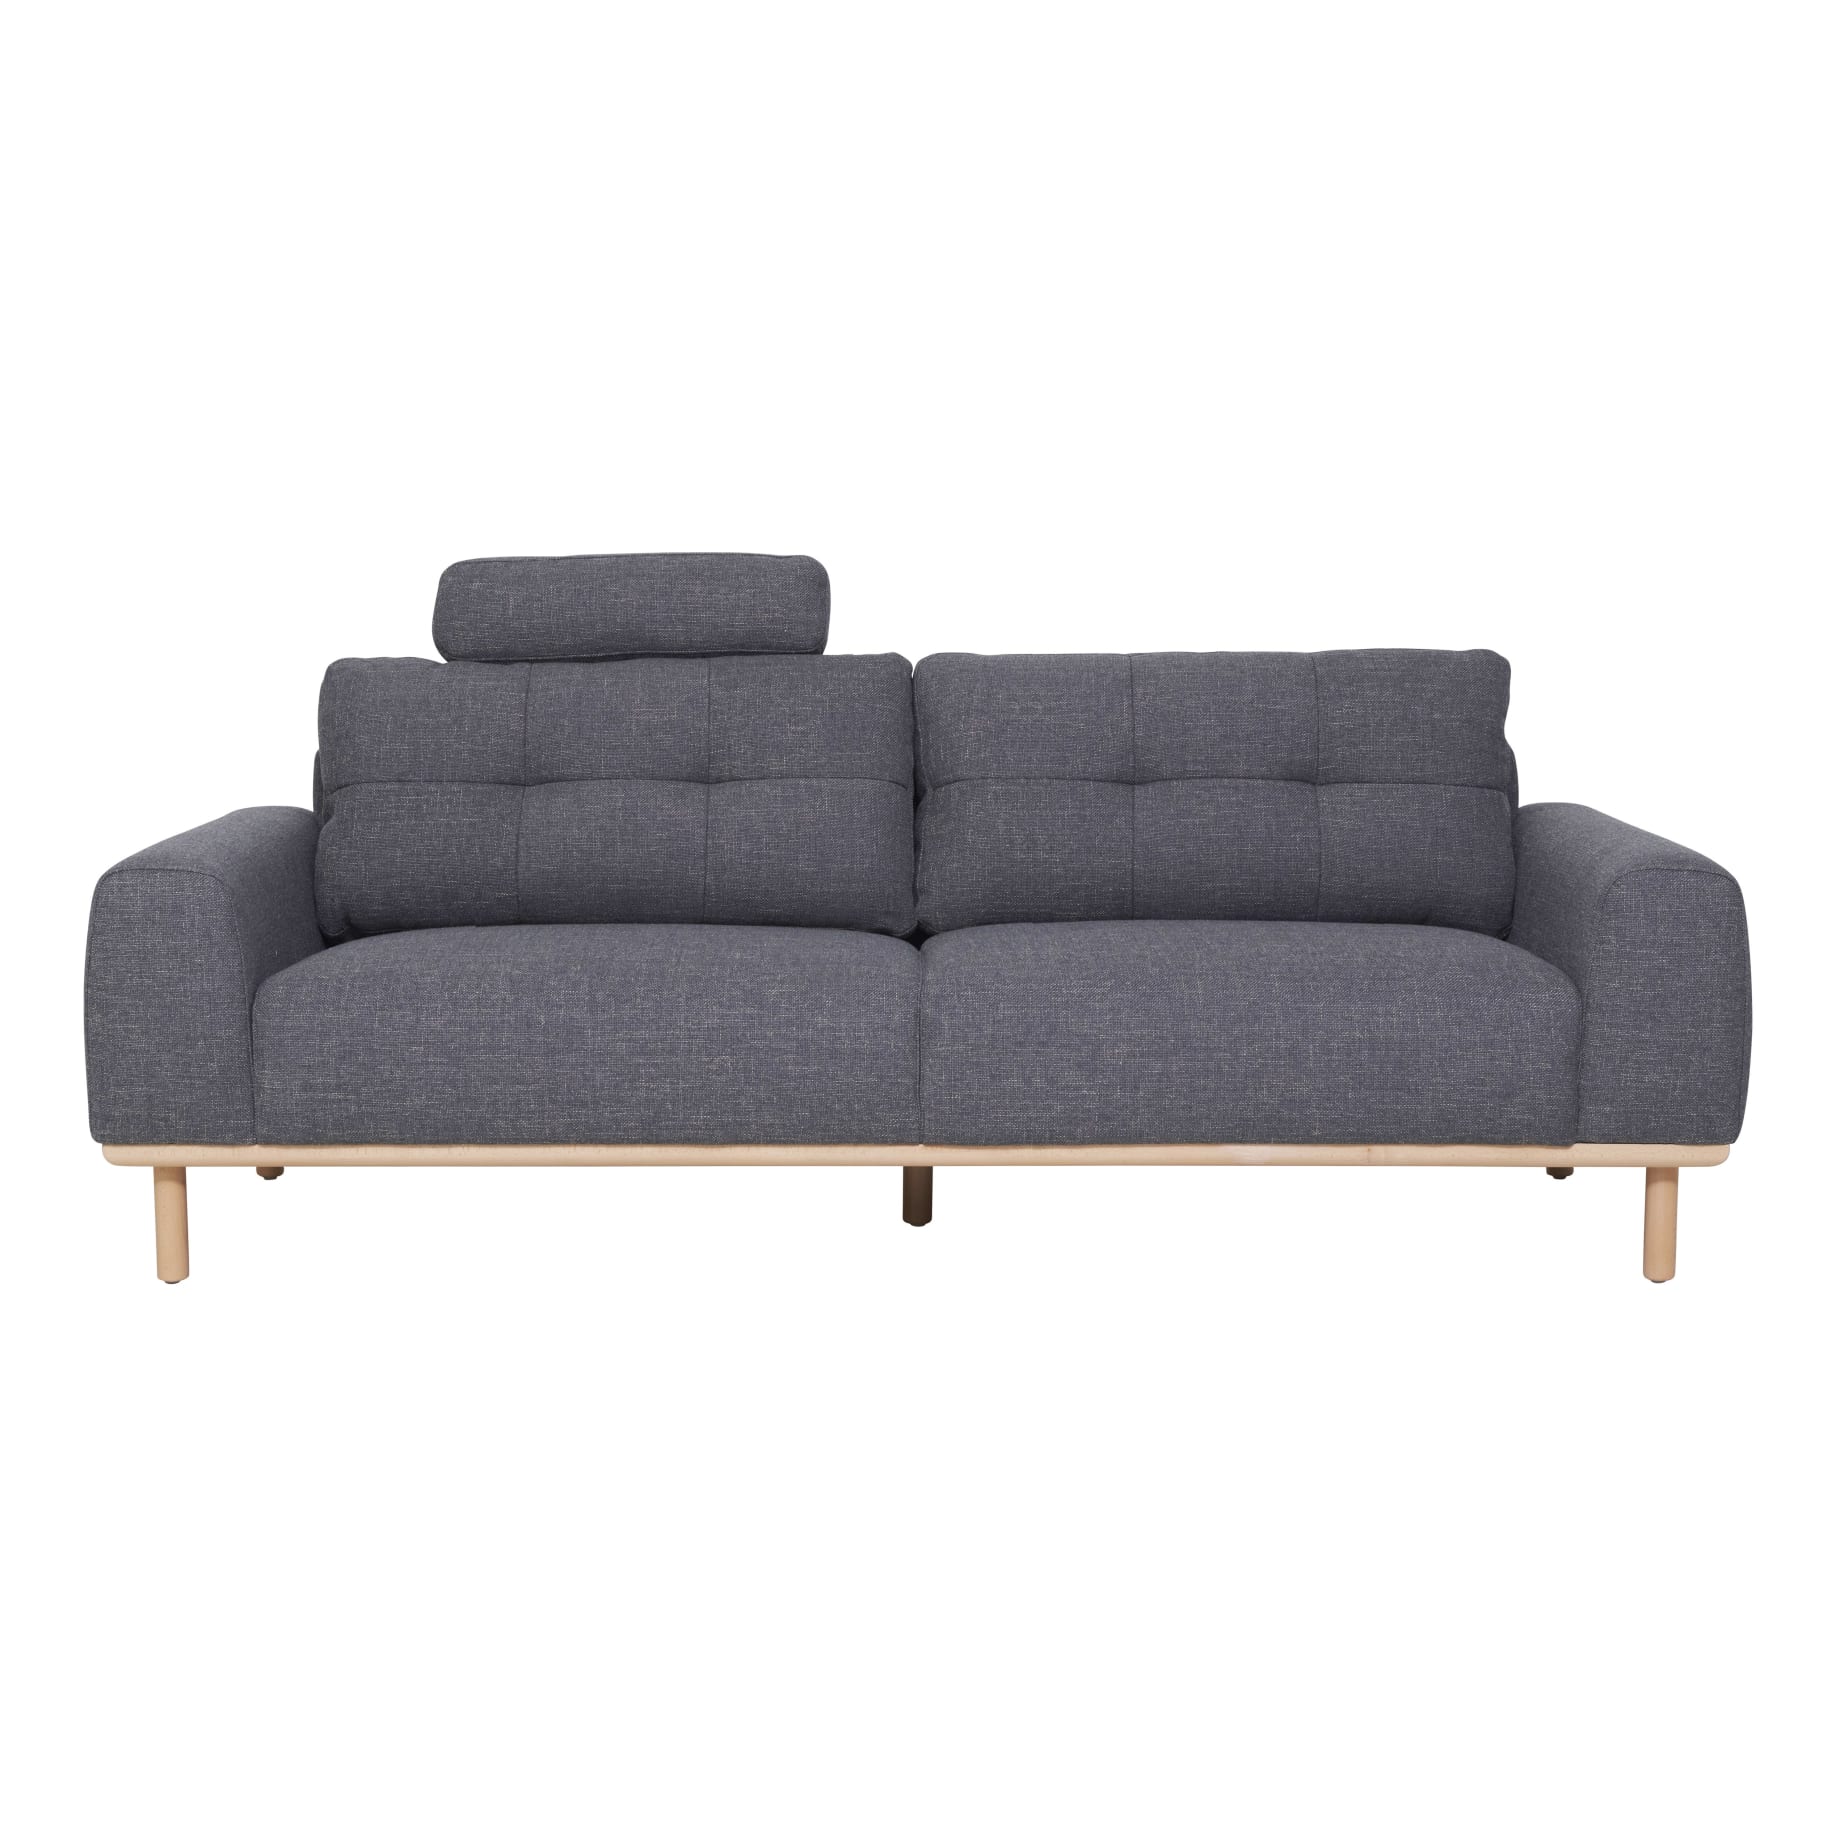 Stratton 3.5 Seater Sofa in Cloud Storm